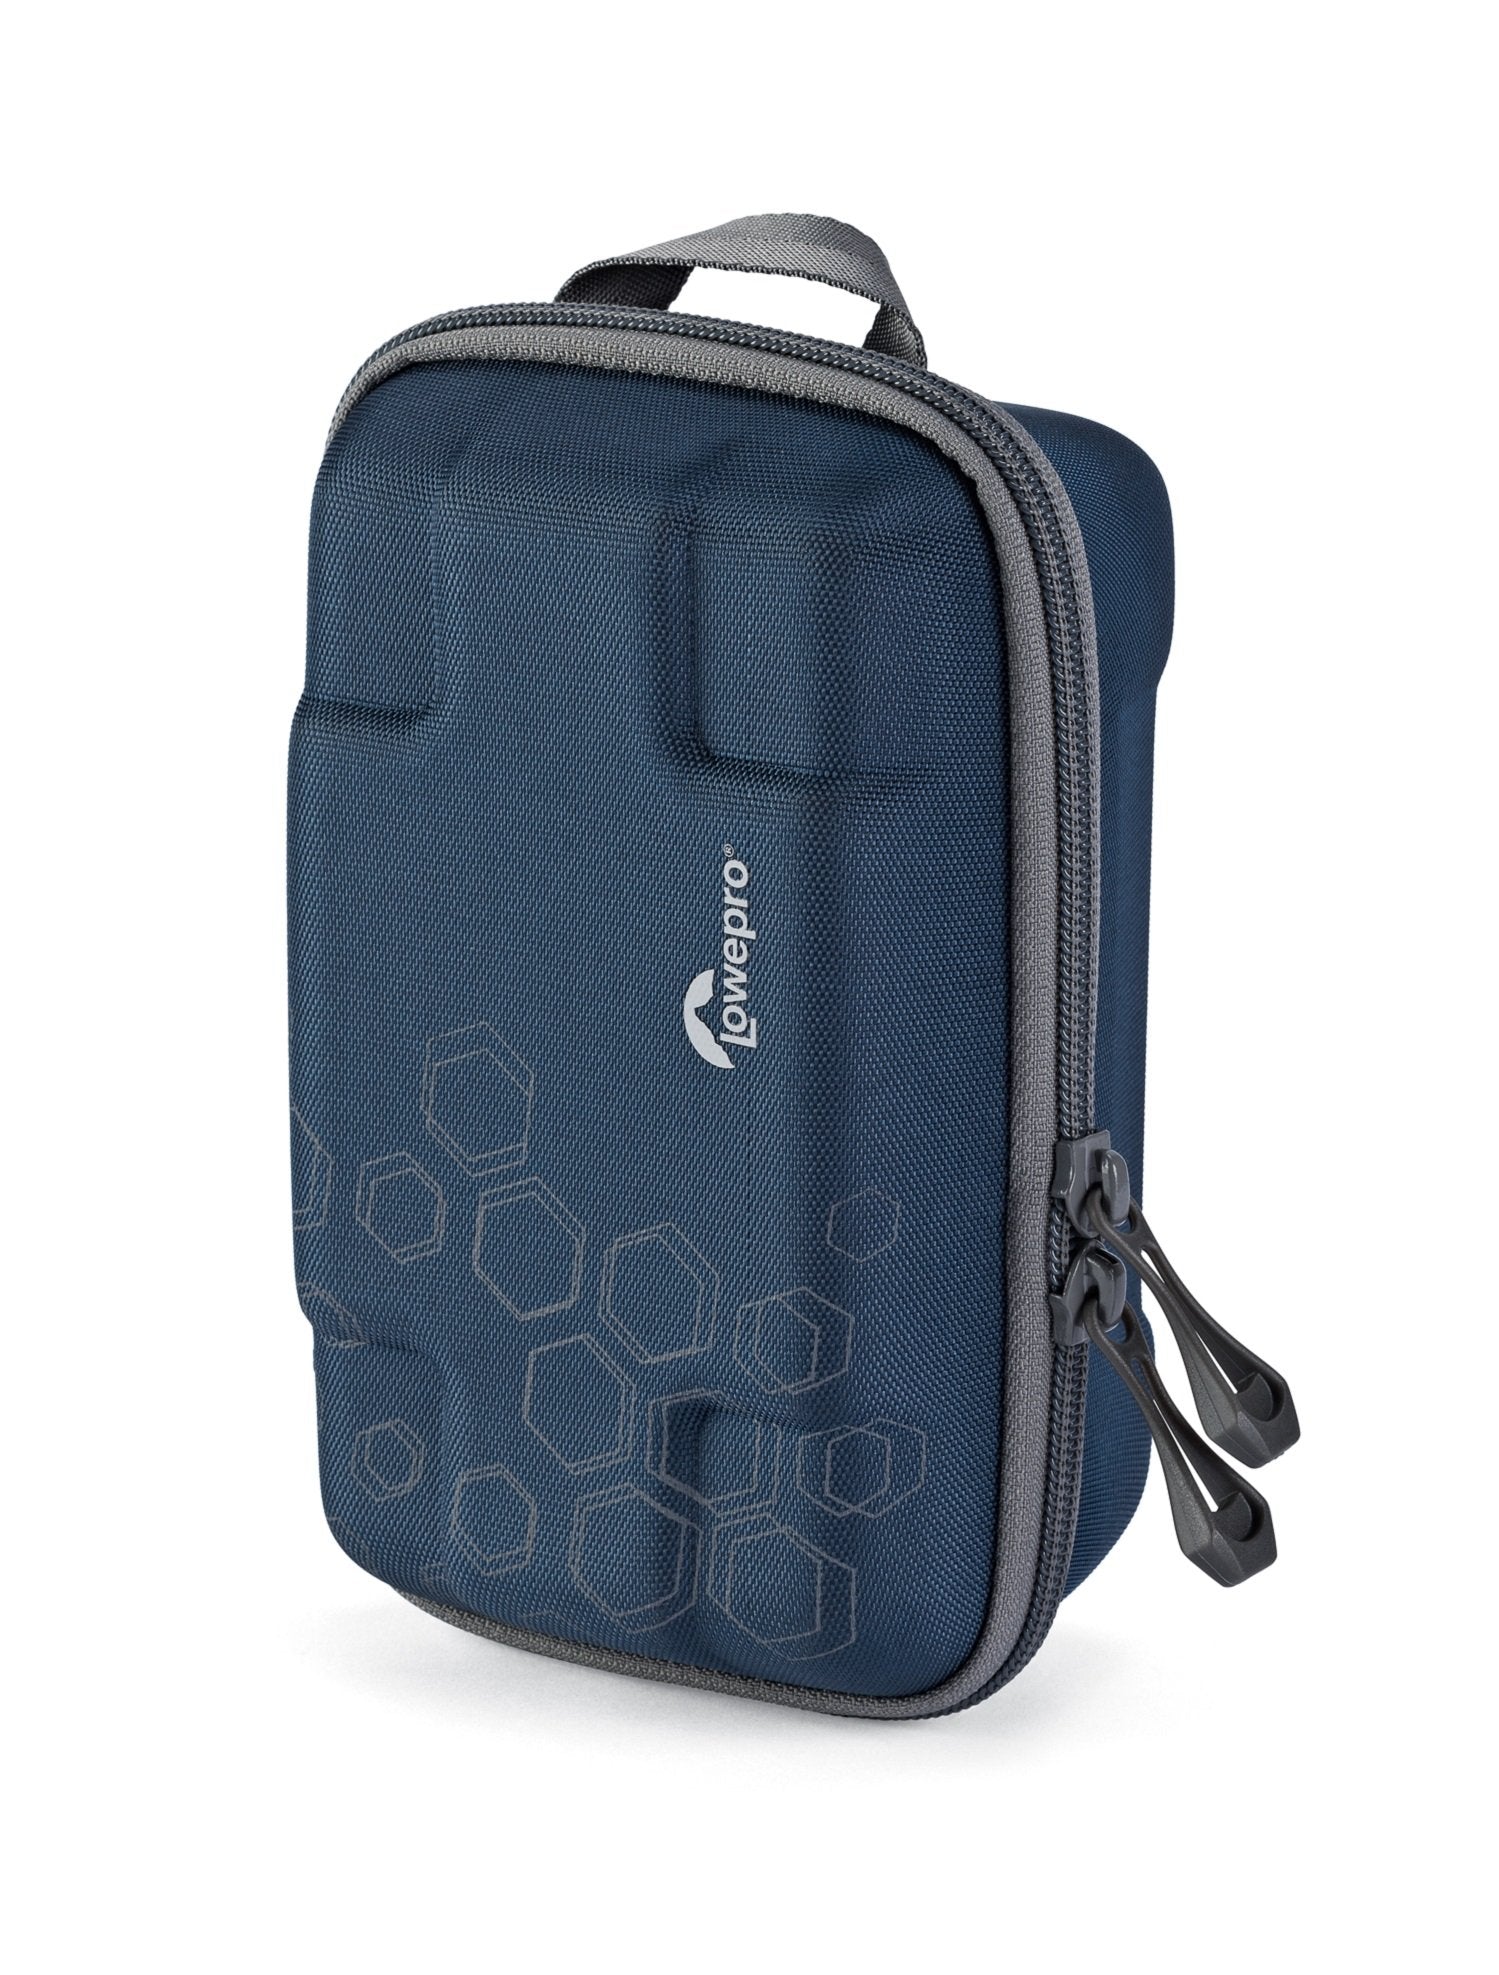 Dashpoint AVC1 GoPro Action Video Case From Lowepro ? Hard Shell Case For GoPro/Action Video Camera